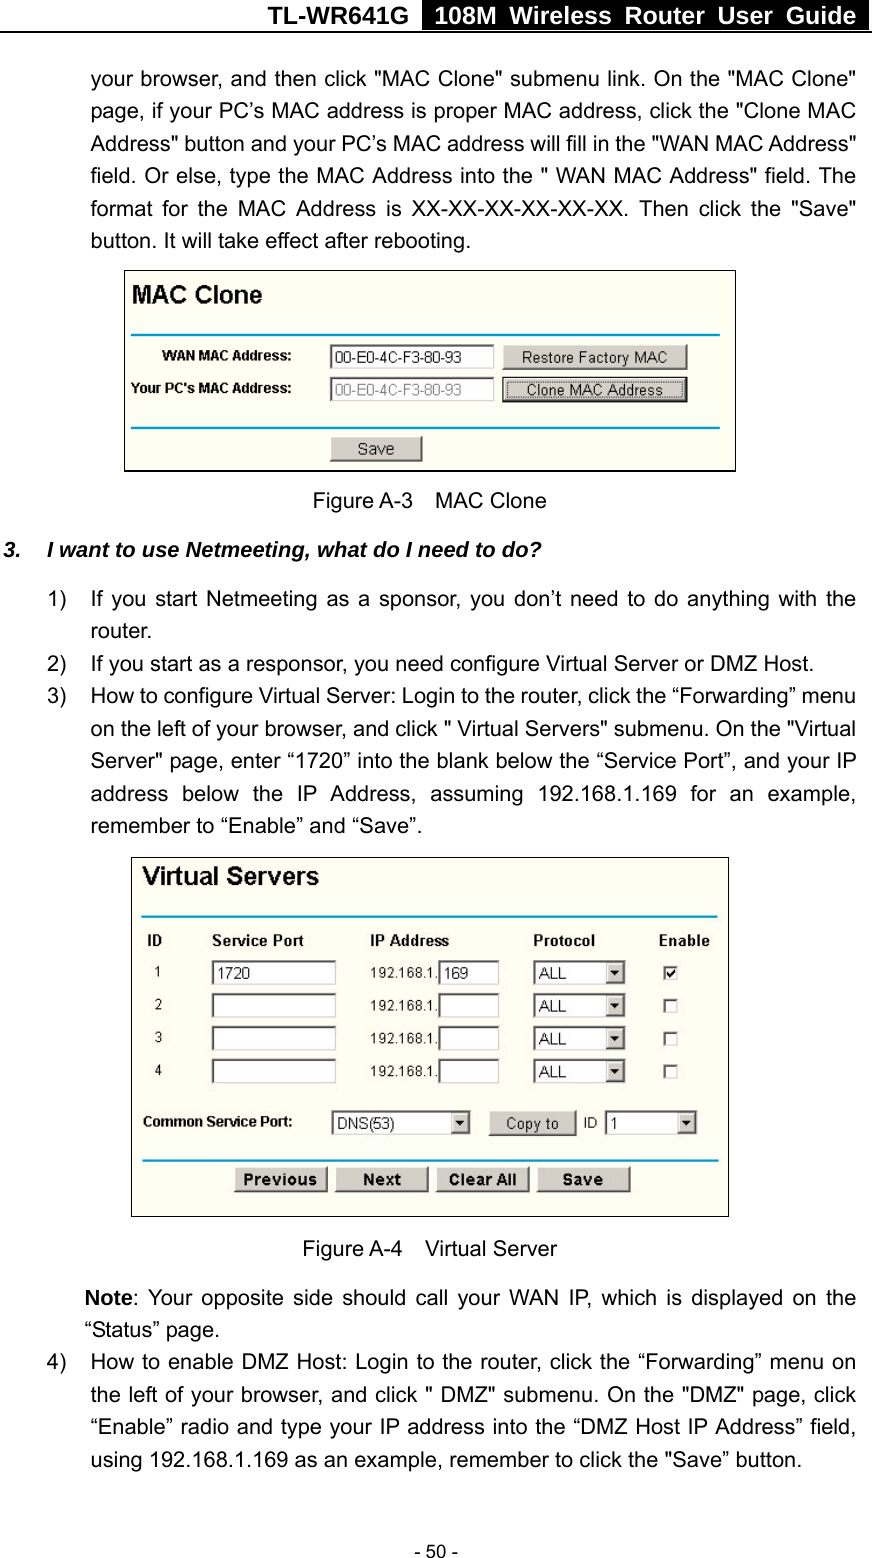 TL-WR641G   108M Wireless Router User Guide   - 50 -your browser, and then click &quot;MAC Clone&quot; submenu link. On the &quot;MAC Clone&quot; page, if your PC’s MAC address is proper MAC address, click the &quot;Clone MAC Address&quot; button and your PC’s MAC address will fill in the &quot;WAN MAC Address&quot; field. Or else, type the MAC Address into the &quot; WAN MAC Address&quot; field. The format for the MAC Address is XX-XX-XX-XX-XX-XX. Then click the &quot;Save&quot; button. It will take effect after rebooting.  Figure A-3  MAC Clone 3.  I want to use Netmeeting, what do I need to do? 1)  If you start Netmeeting as a sponsor, you don’t need to do anything with the router. 2)  If you start as a responsor, you need configure Virtual Server or DMZ Host. 3)  How to configure Virtual Server: Login to the router, click the “Forwarding” menu on the left of your browser, and click &quot; Virtual Servers&quot; submenu. On the &quot;Virtual Server&quot; page, enter “1720” into the blank below the “Service Port”, and your IP address below the IP Address, assuming 192.168.1.169 for an example, remember to “Enable” and “Save”.    Figure A-4  Virtual Server Note: Your opposite side should call your WAN IP, which is displayed on the “Status” page. 4)  How to enable DMZ Host: Login to the router, click the “Forwarding” menu on the left of your browser, and click &quot; DMZ&quot; submenu. On the &quot;DMZ&quot; page, click “Enable” radio and type your IP address into the “DMZ Host IP Address” field, using 192.168.1.169 as an example, remember to click the &quot;Save” button.   